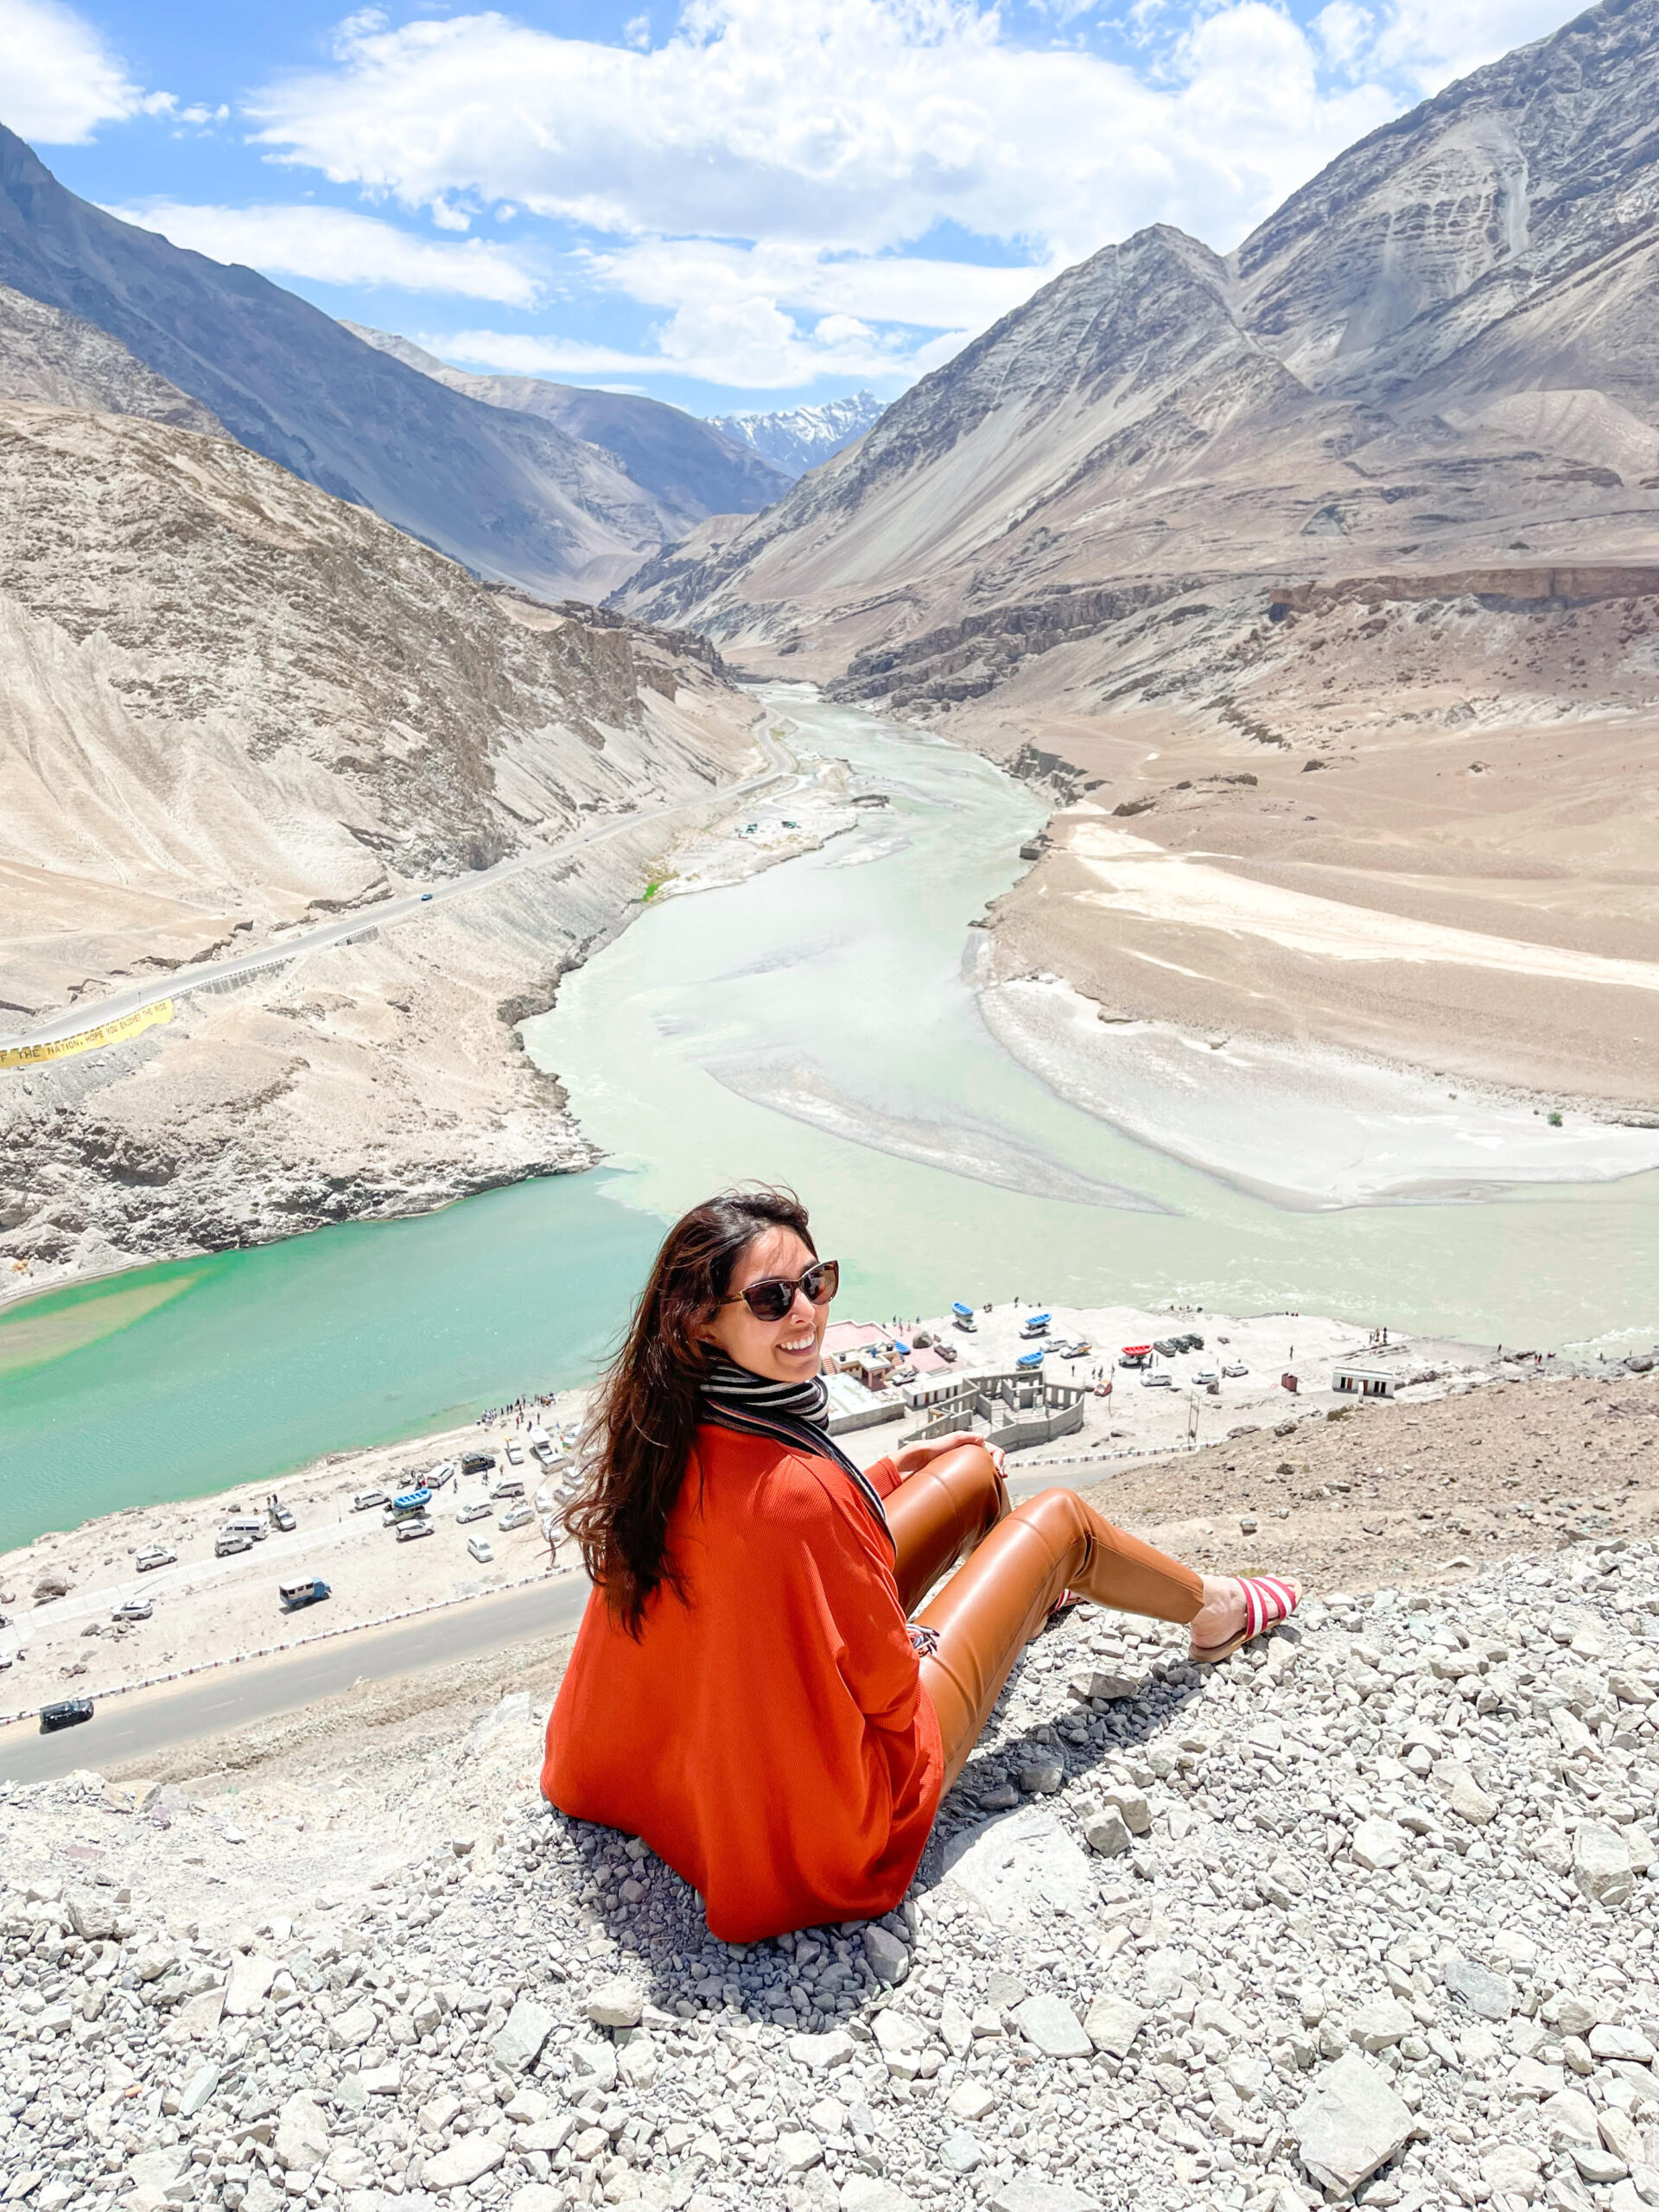 Ladakh: Experience breathtaking landscapes and highest mountain passes